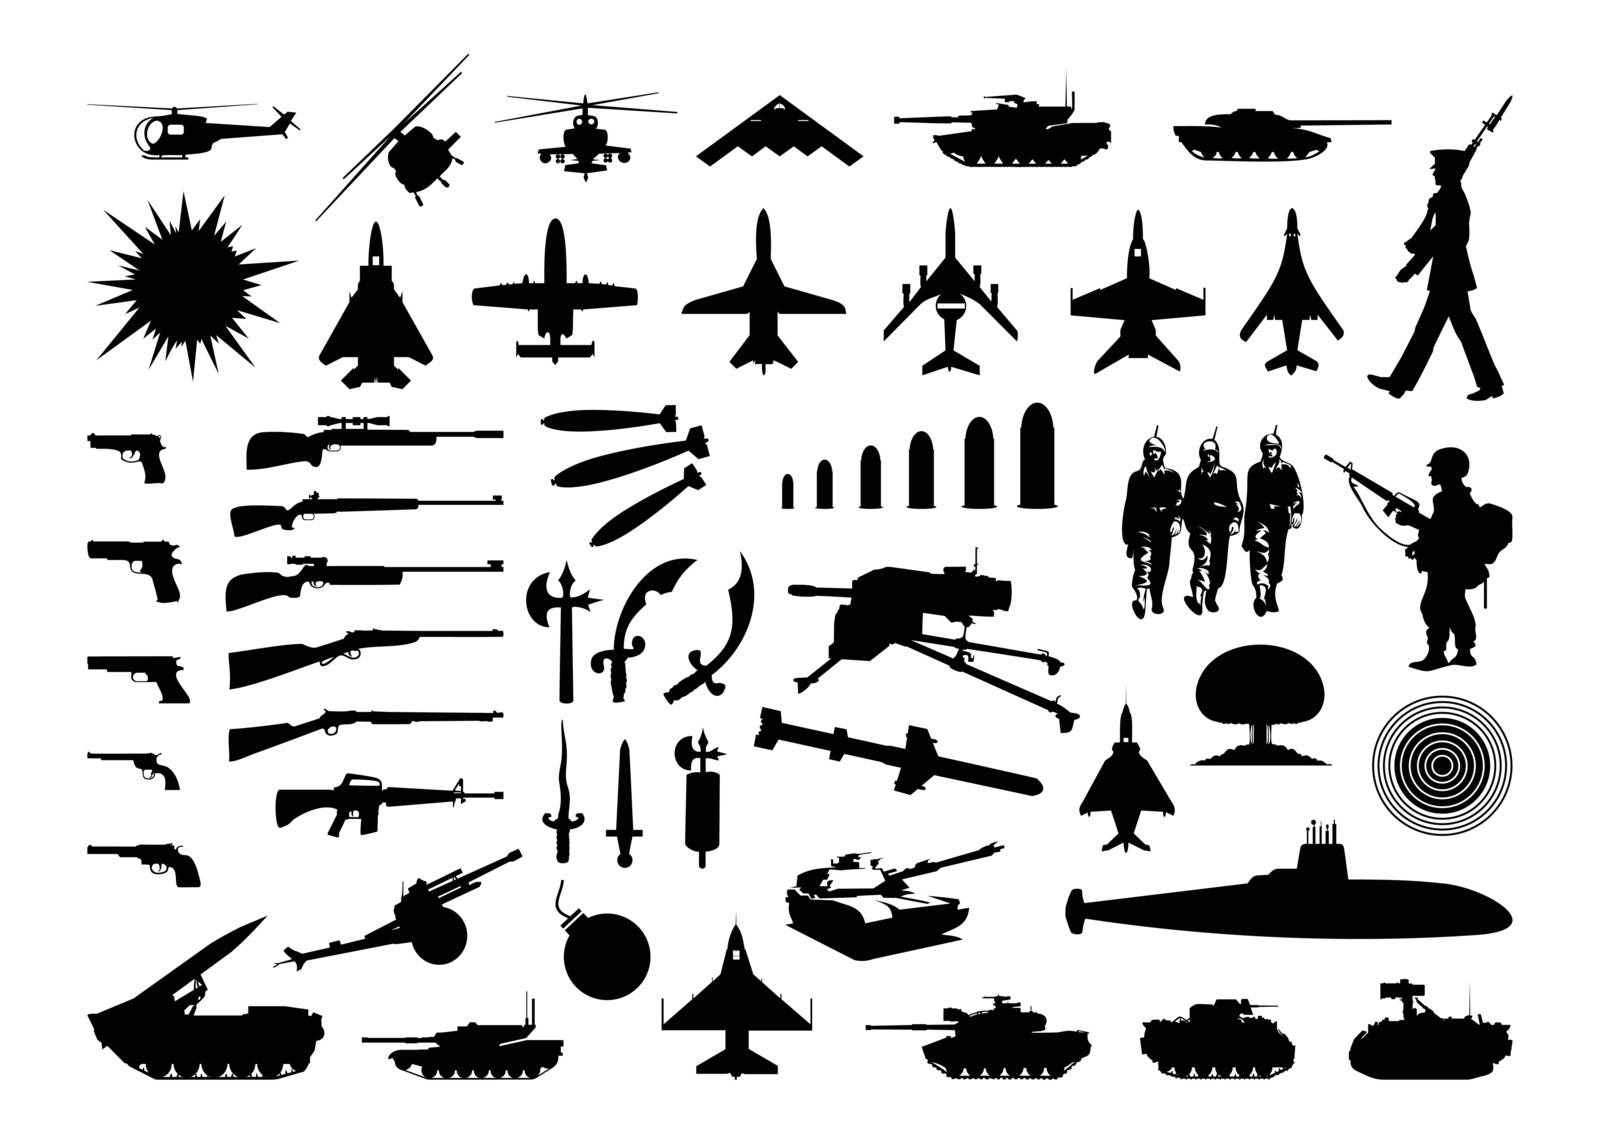 Silhouettes of the various weapon and engineering. A vector illustration